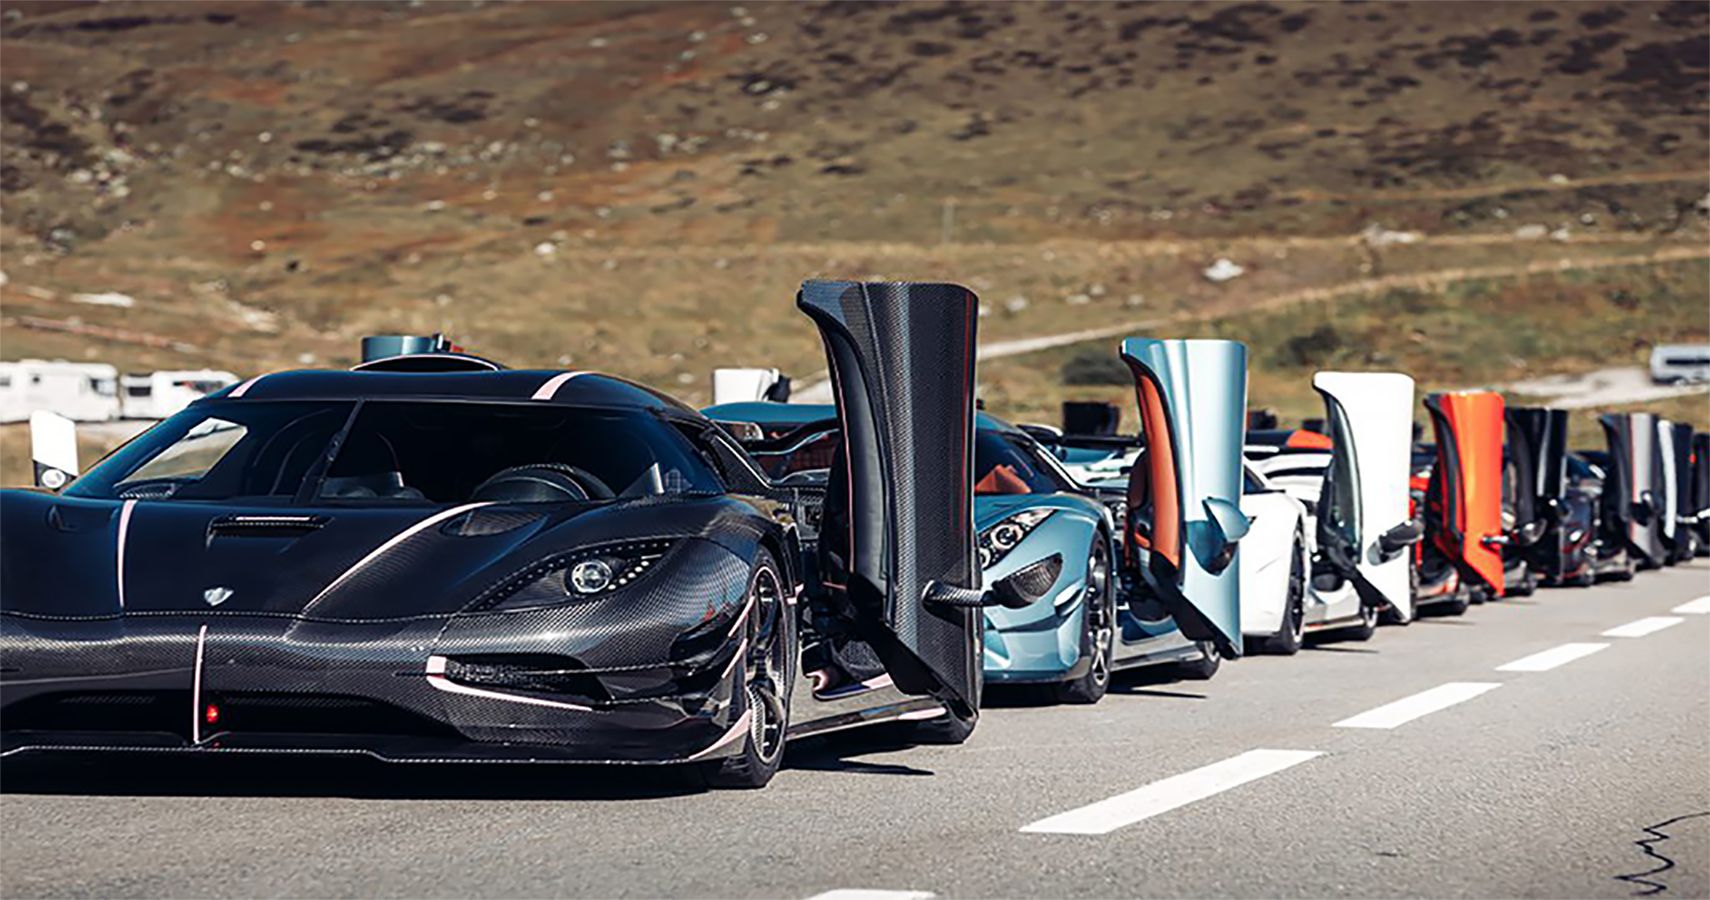 14 Koenigseggs Descend On Swiss Village For Owners' Ghost Squadron Event